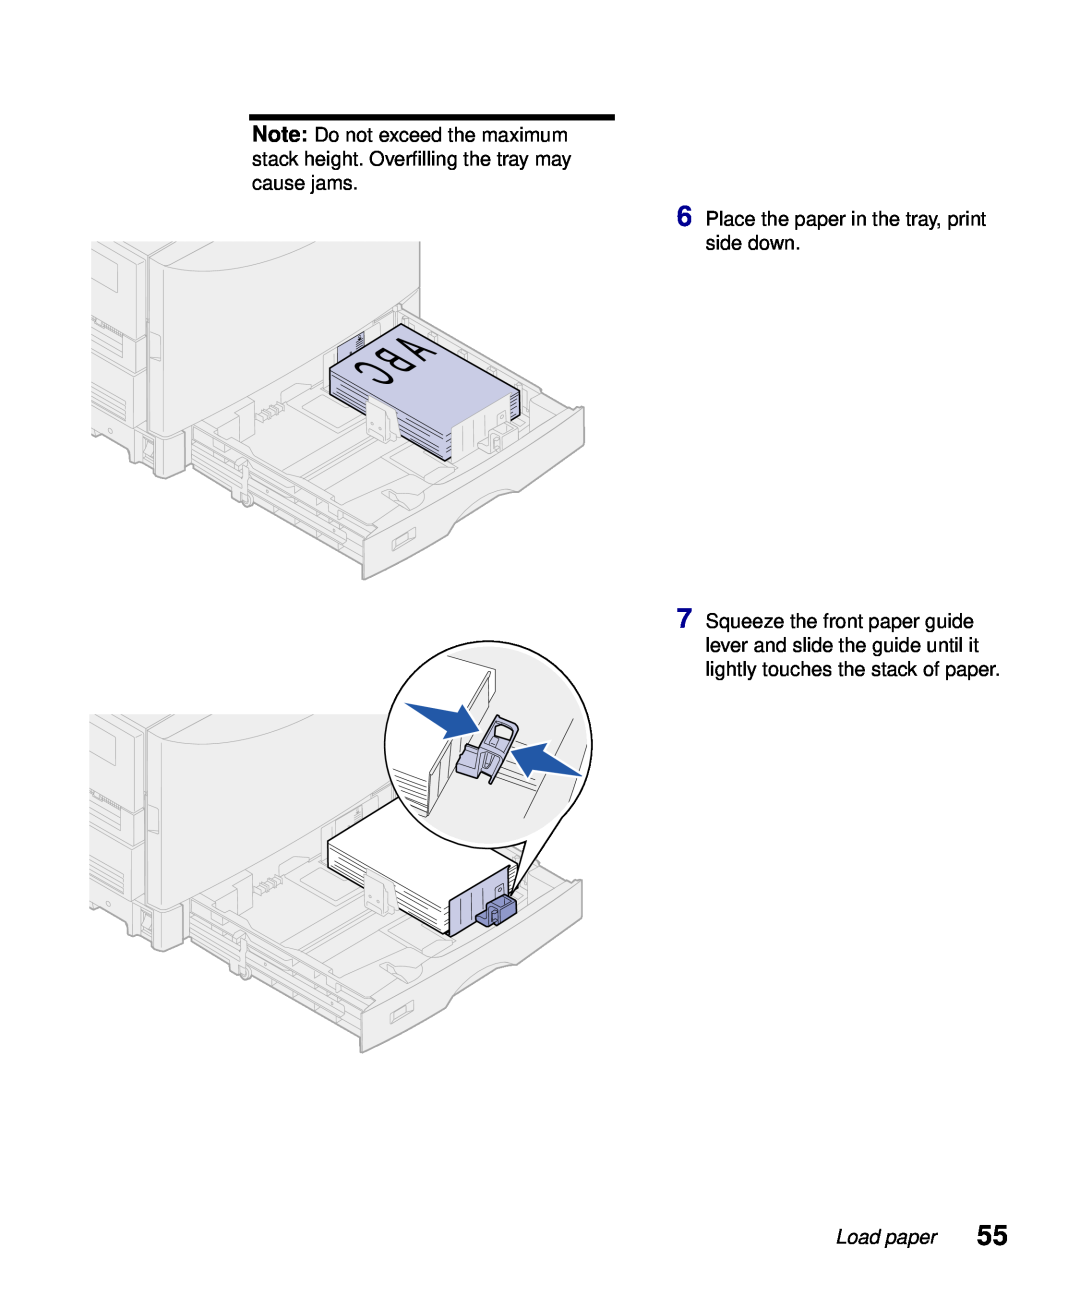 Lexmark S510-2222-00 setup guide Place the paper in the tray, print side down, Load paper 